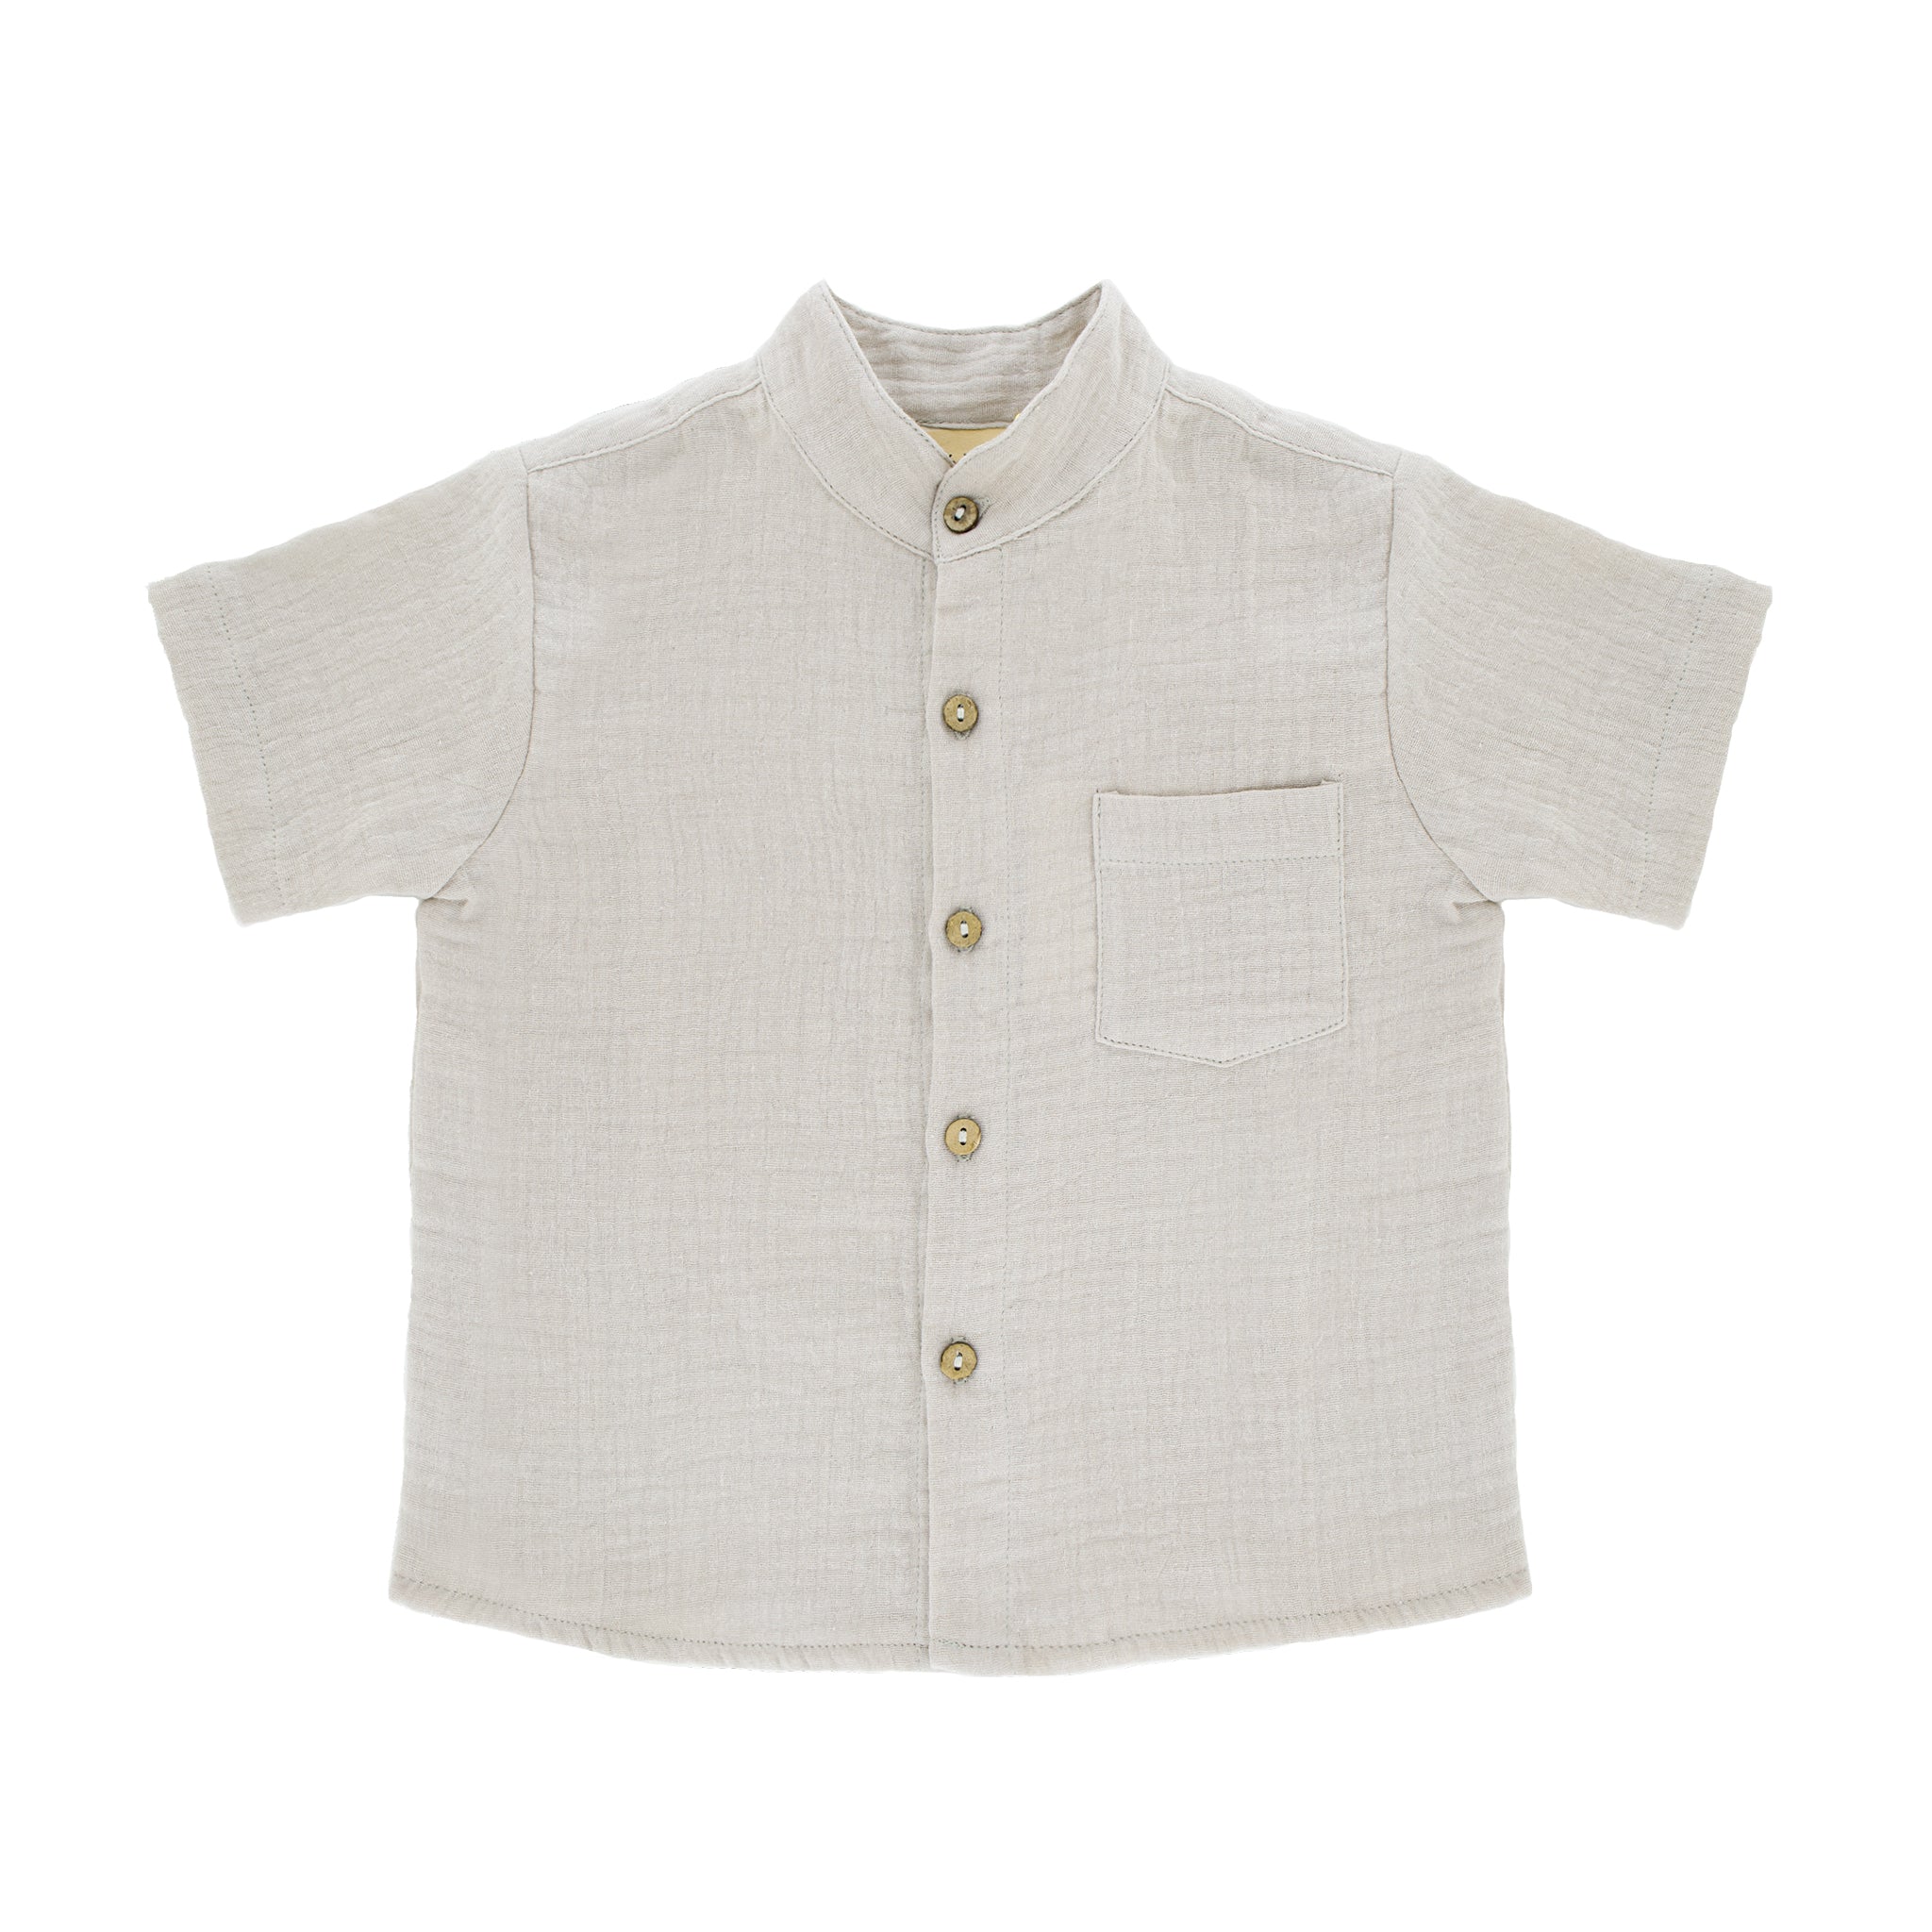 boys-shirt-blouse-top-short-sleeves-coconut_buttons-round_neck-round_collar-pocket-beige-natural-organic-muslin-cotton-Les_Vedettes